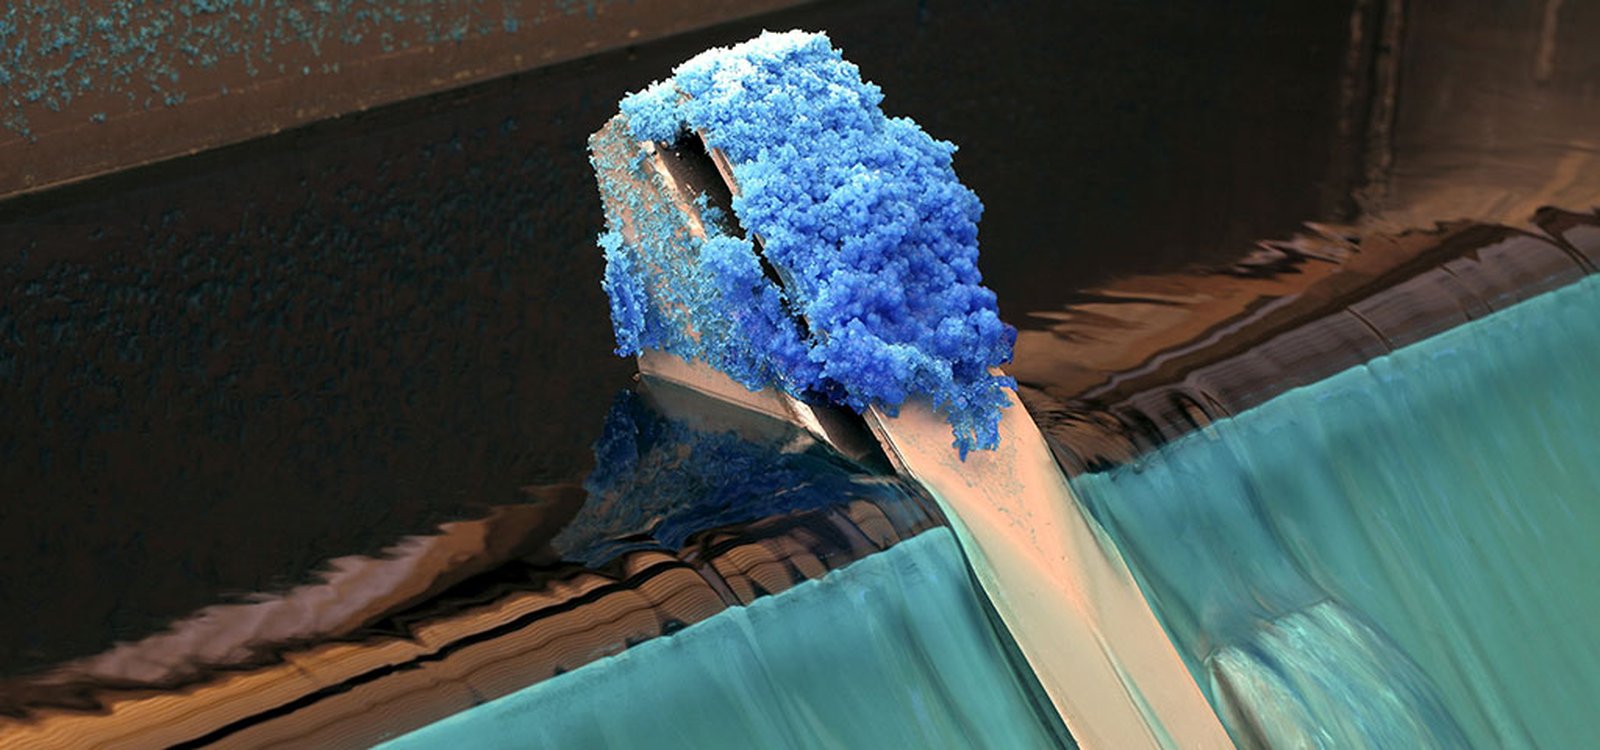 <p>Extremophiles are microorganisms that help extract copper from sulphide ore. </p>
